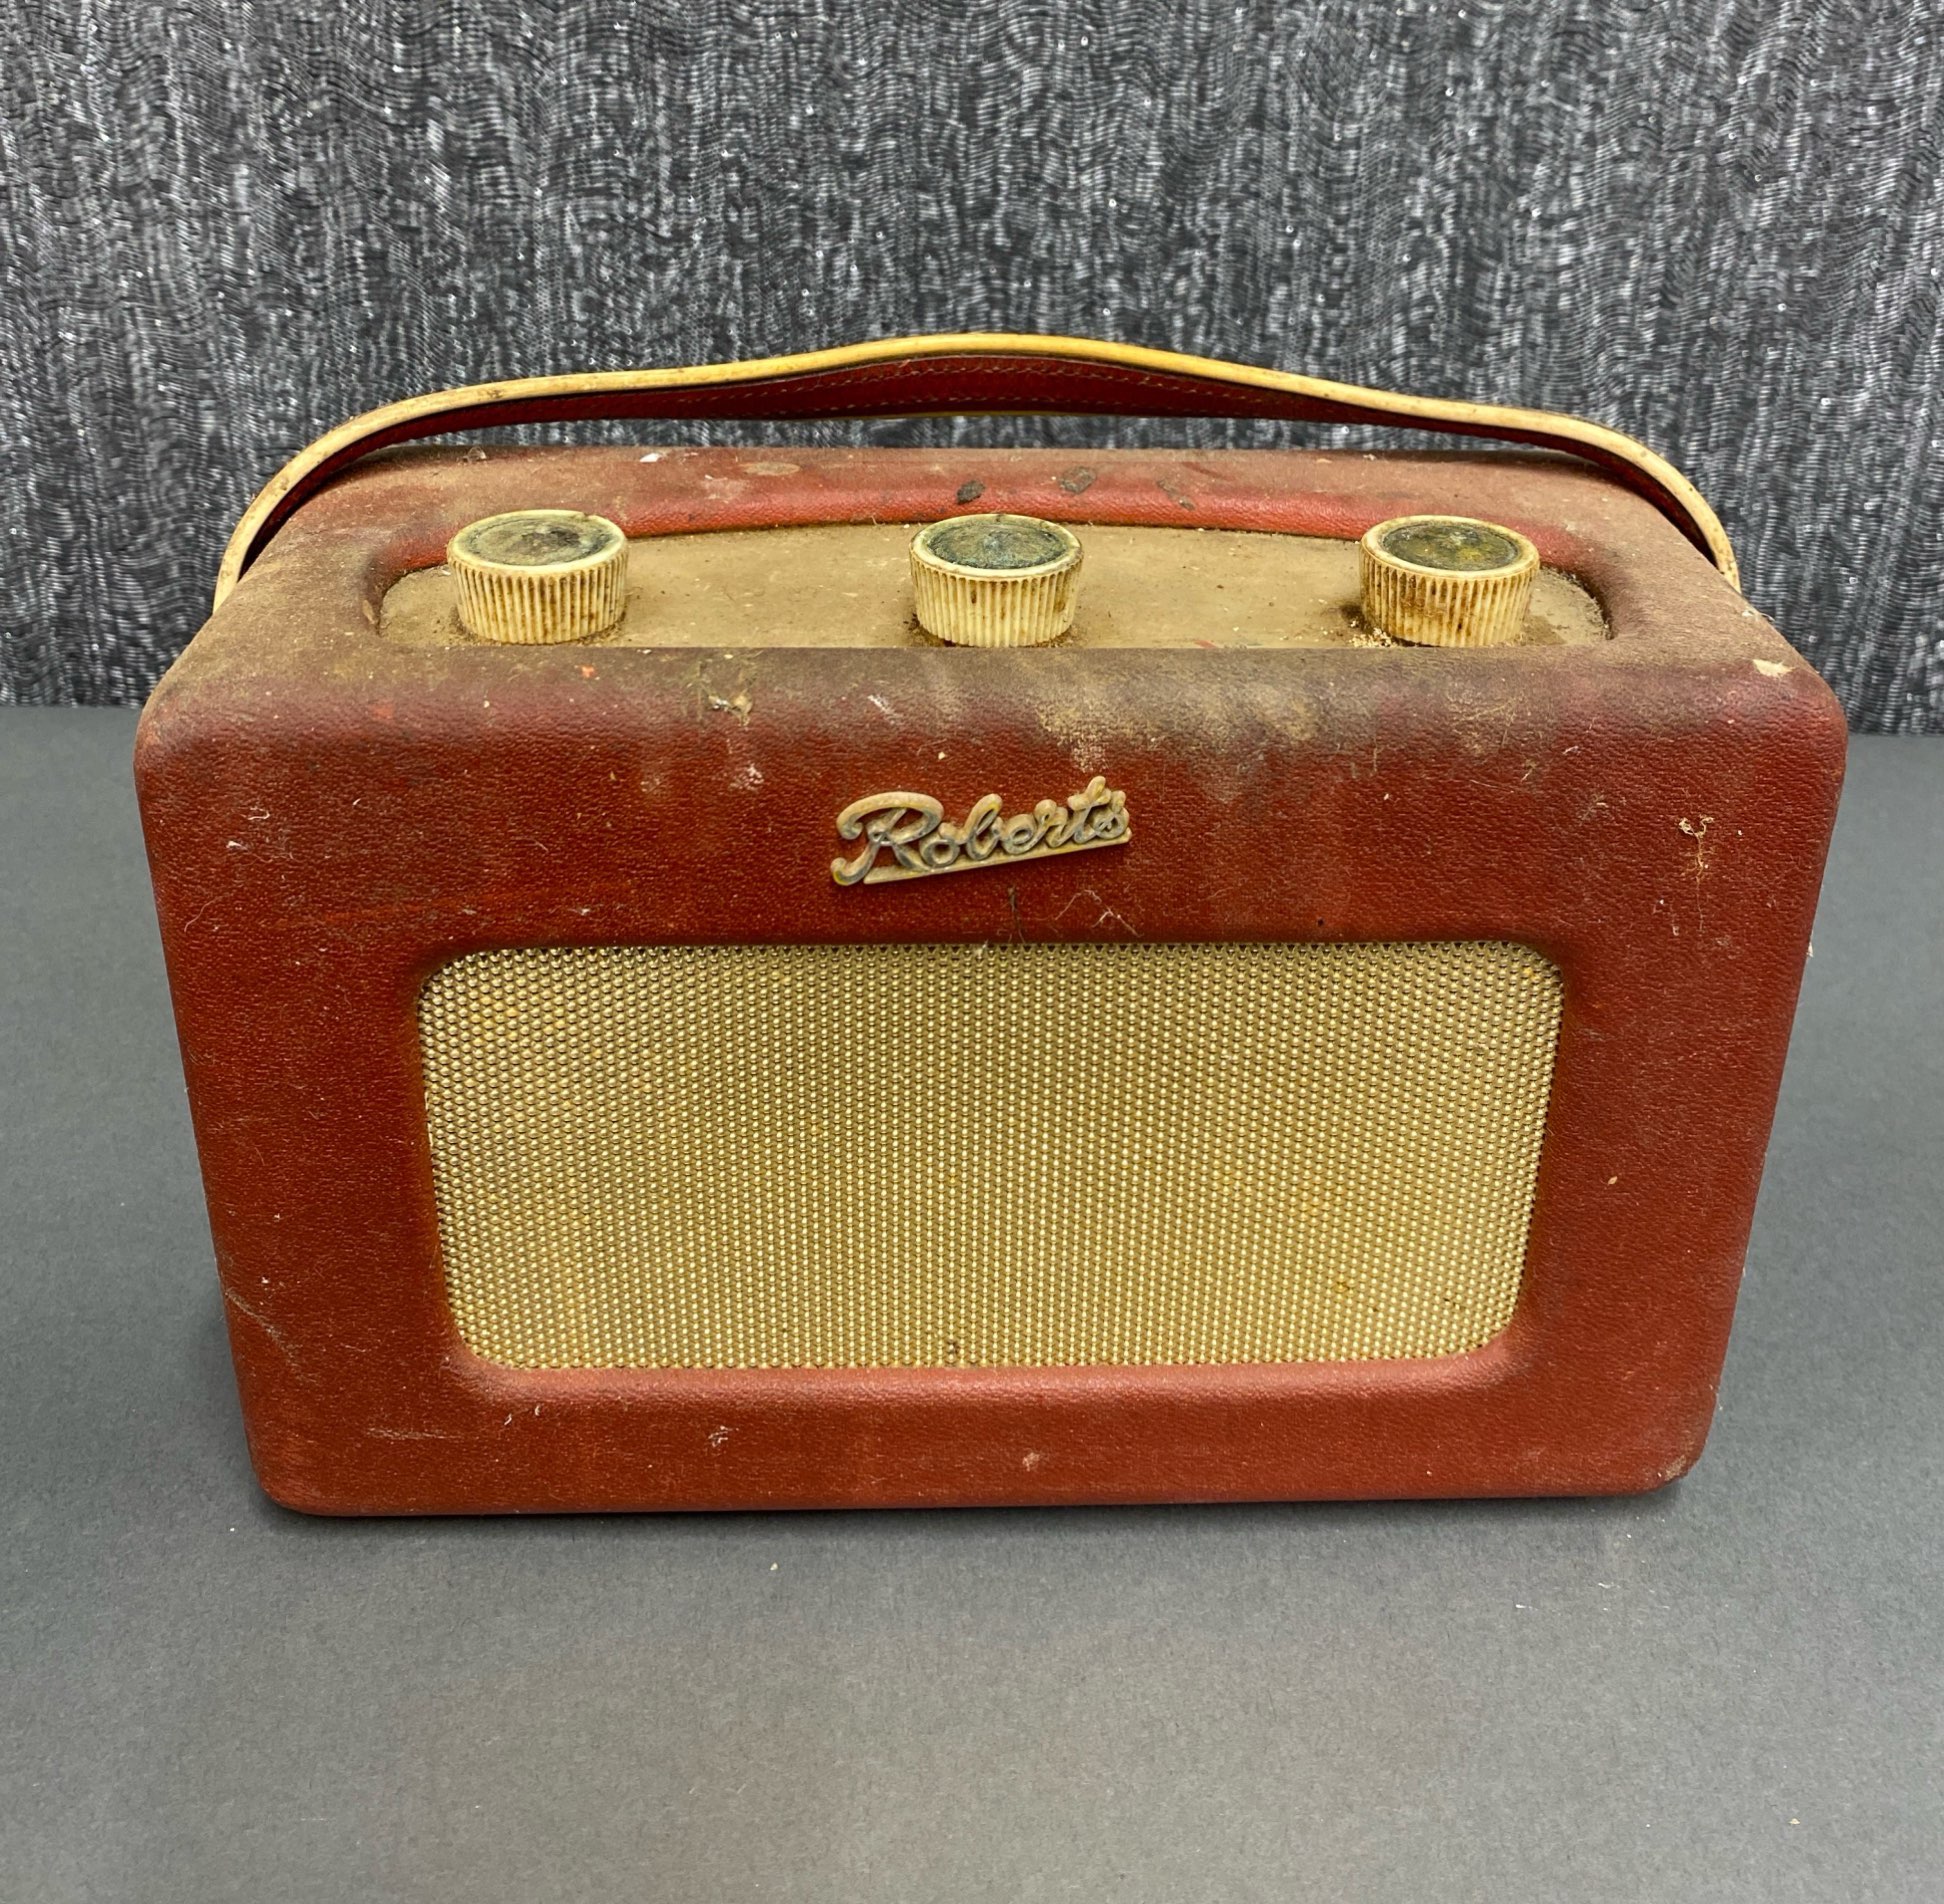 A group of three early Roberts transistor radios, including two R200 and one R300. - Image 5 of 5